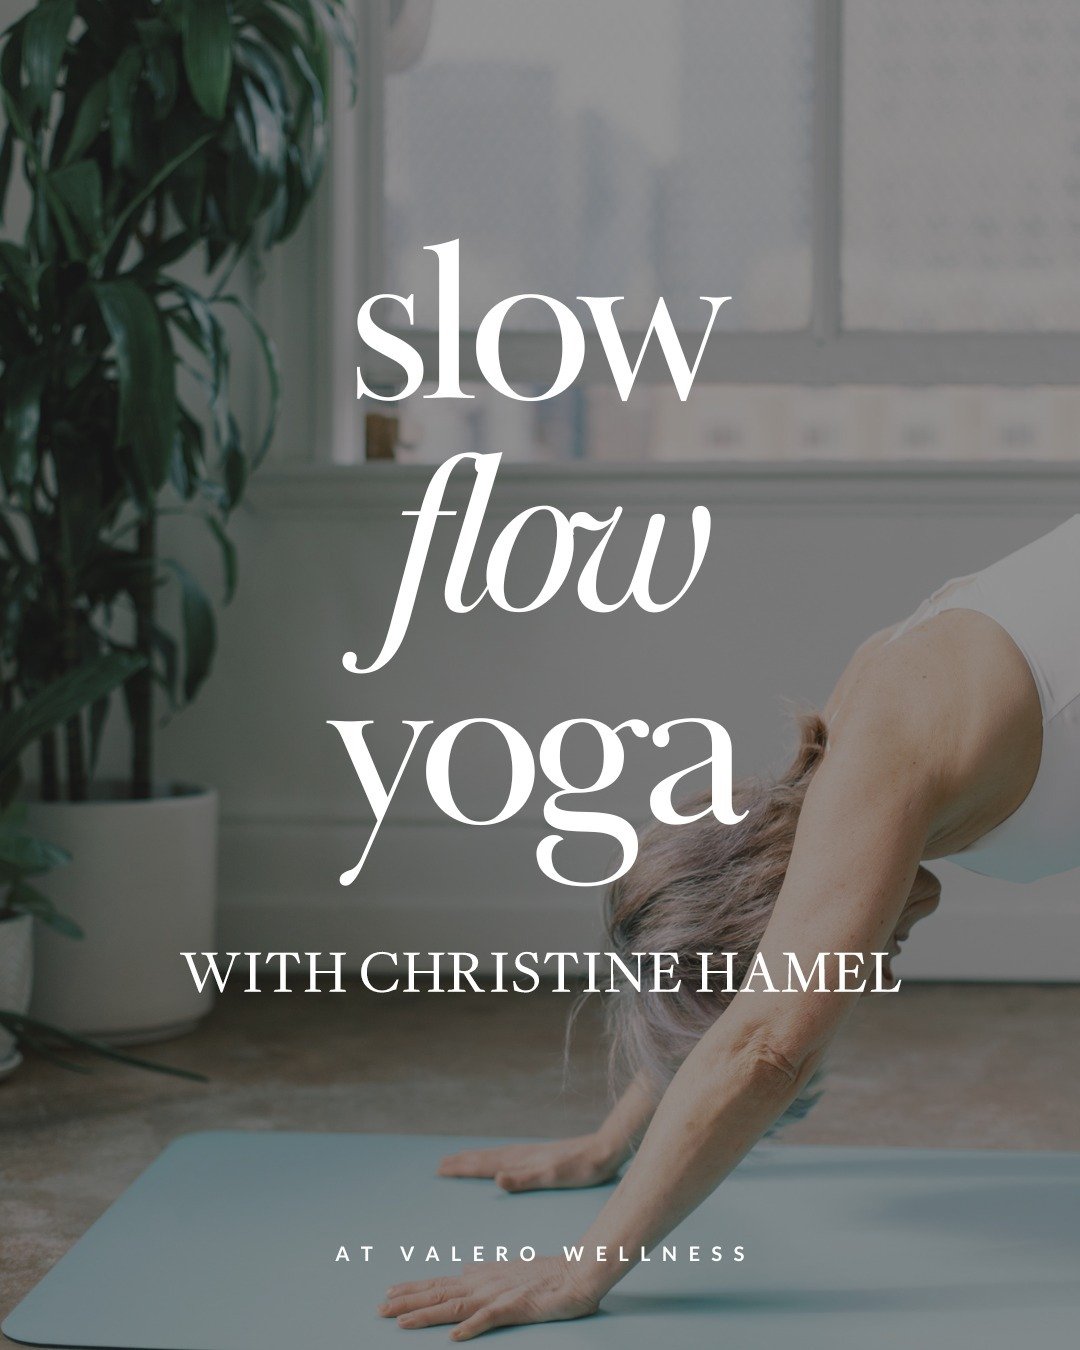 Take some time to relax &amp; unwind with slow flow yoga at Valero Wellness 🧘&zwj;♀️⁠ ⁠
⁠
✨ WHEN: ⁠
Wednesday April 24 from 6:30 -7:30 pm⁠
⁠
✨ WHERE:⁠
Valero Wellness⁠ - IV Room⁠
480 Advance Boulevard, Tecumseh, N8N 0B7 ⁠
⁠
✨ COST:⁠
$18 per class⁠
⁠